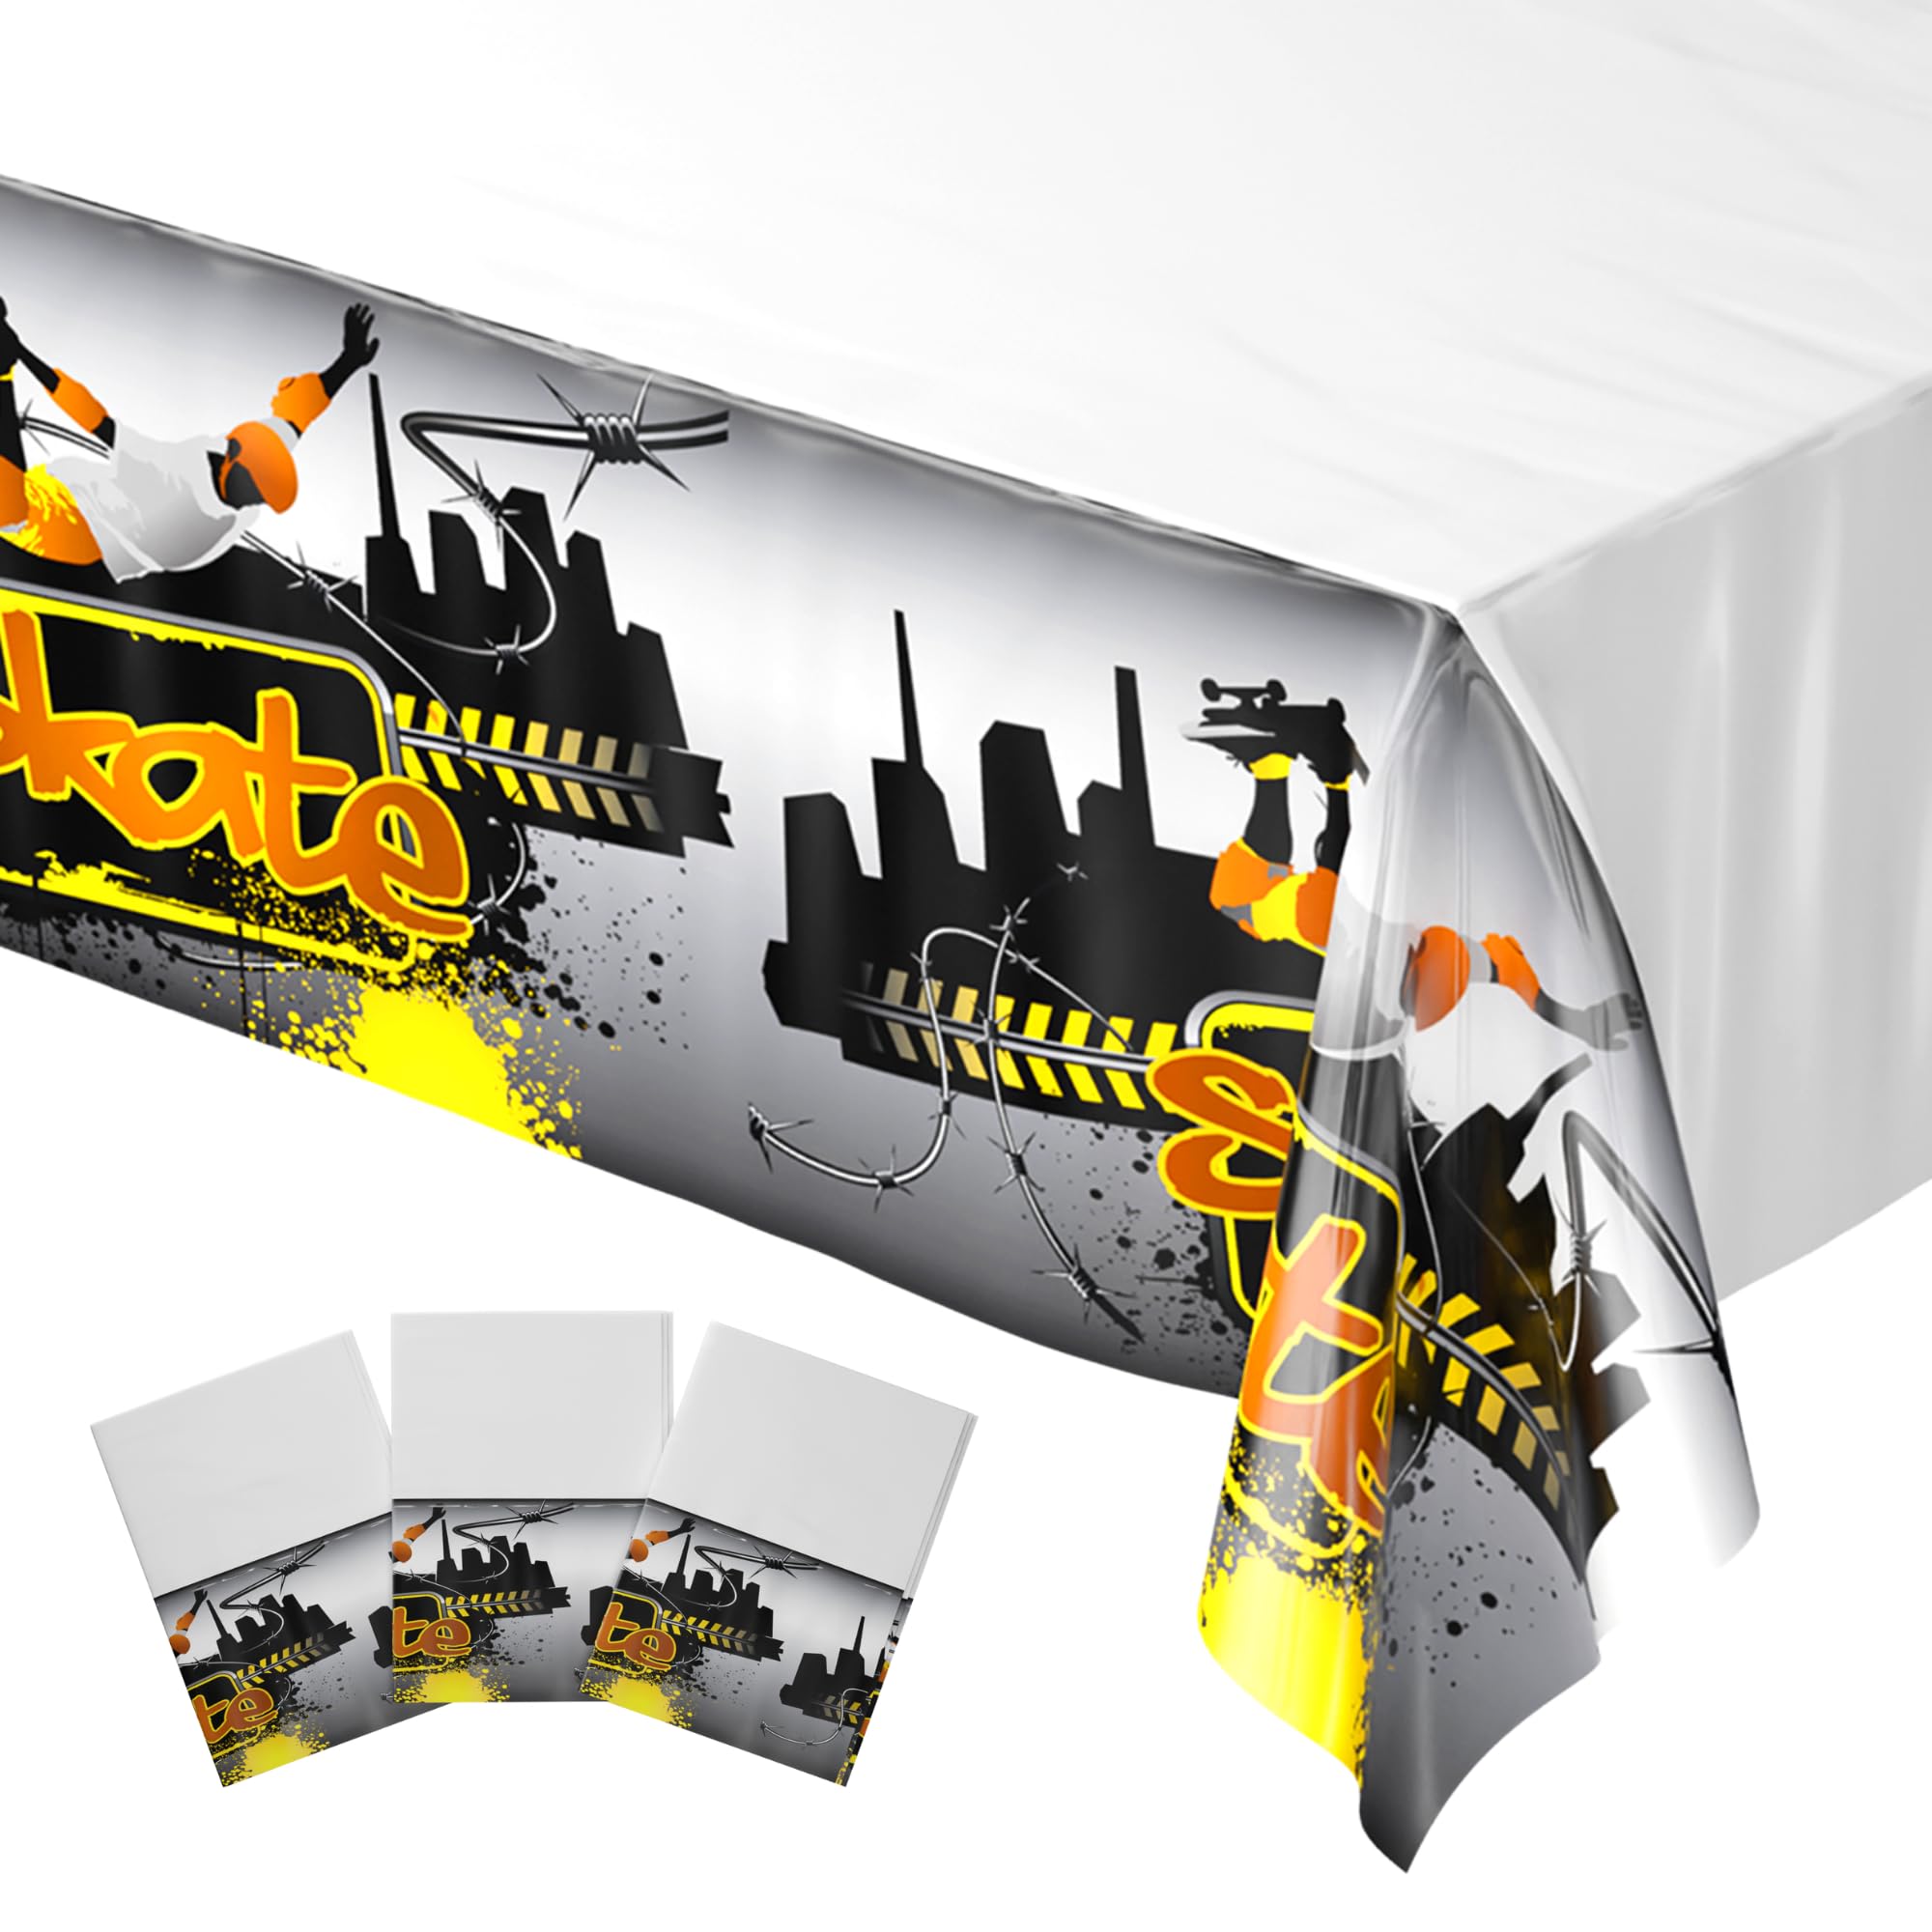 Skate Party Table covers - 54in x 108in (3 Pack)